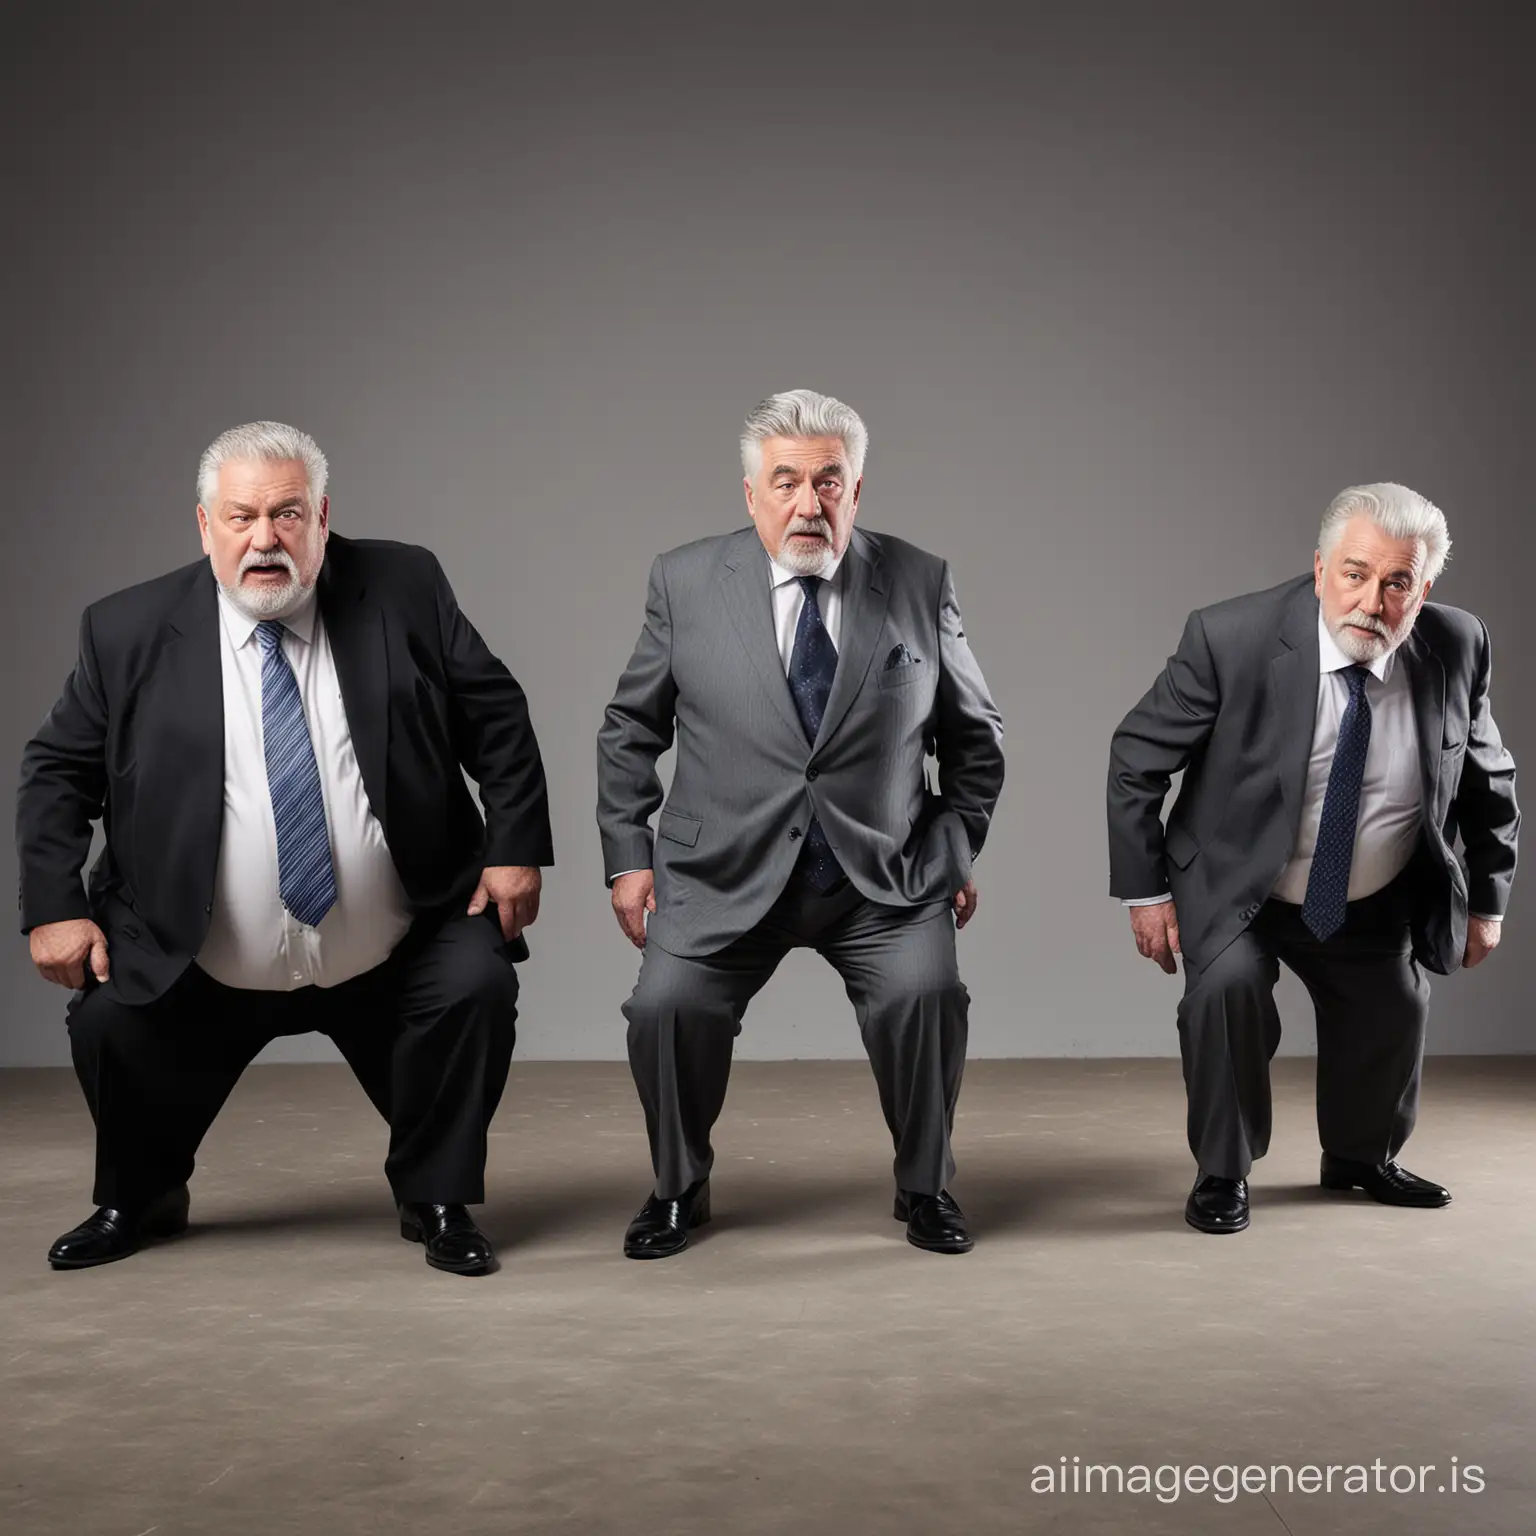 Three fat men, all 80 years old businessman, shot height, both wearing suits, black loafers, grey hair,  embarrassing face, bending down, full body shot, full body shot, office background, dramatic lighting